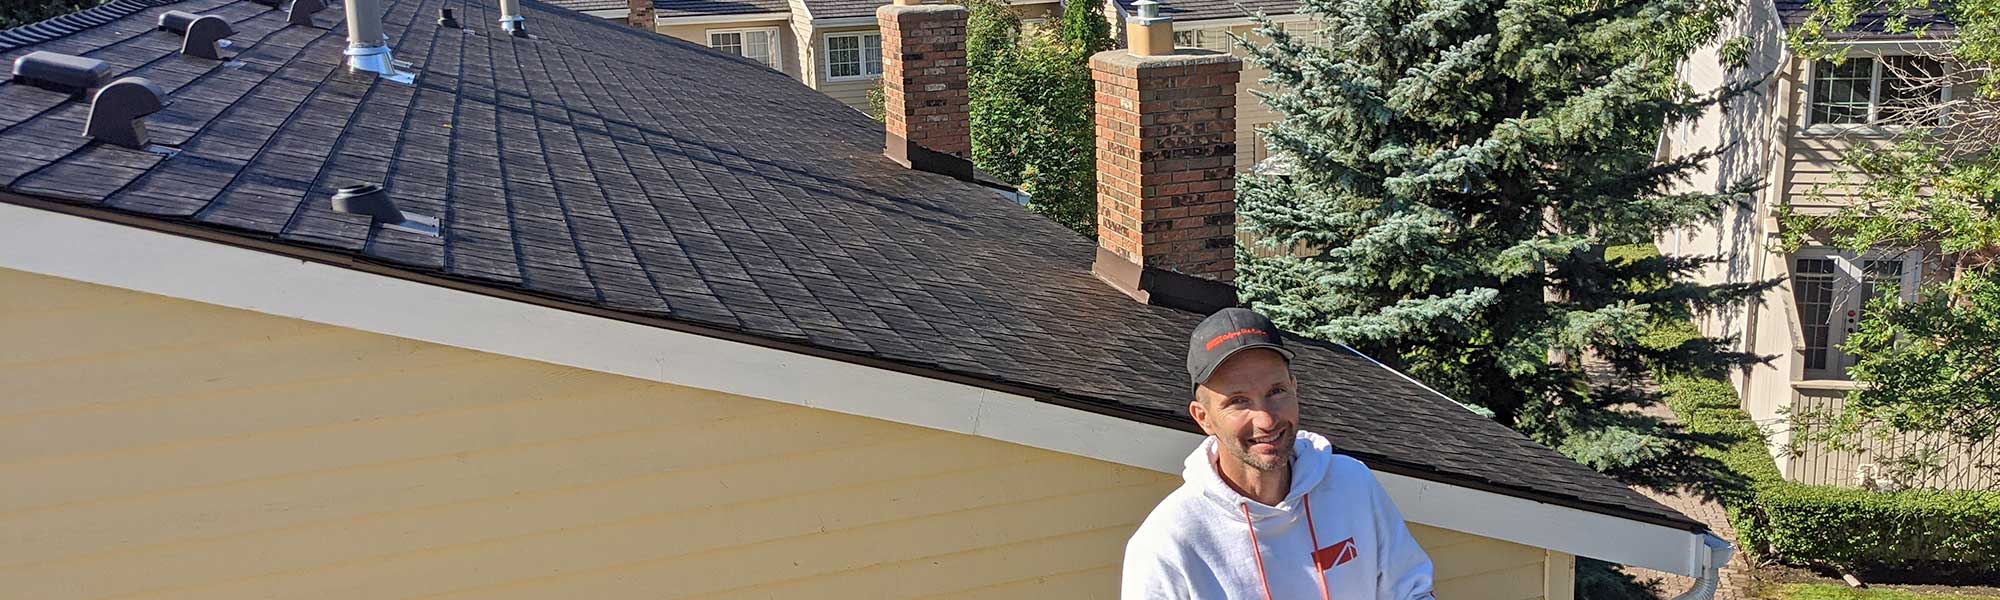 About Us Roofers